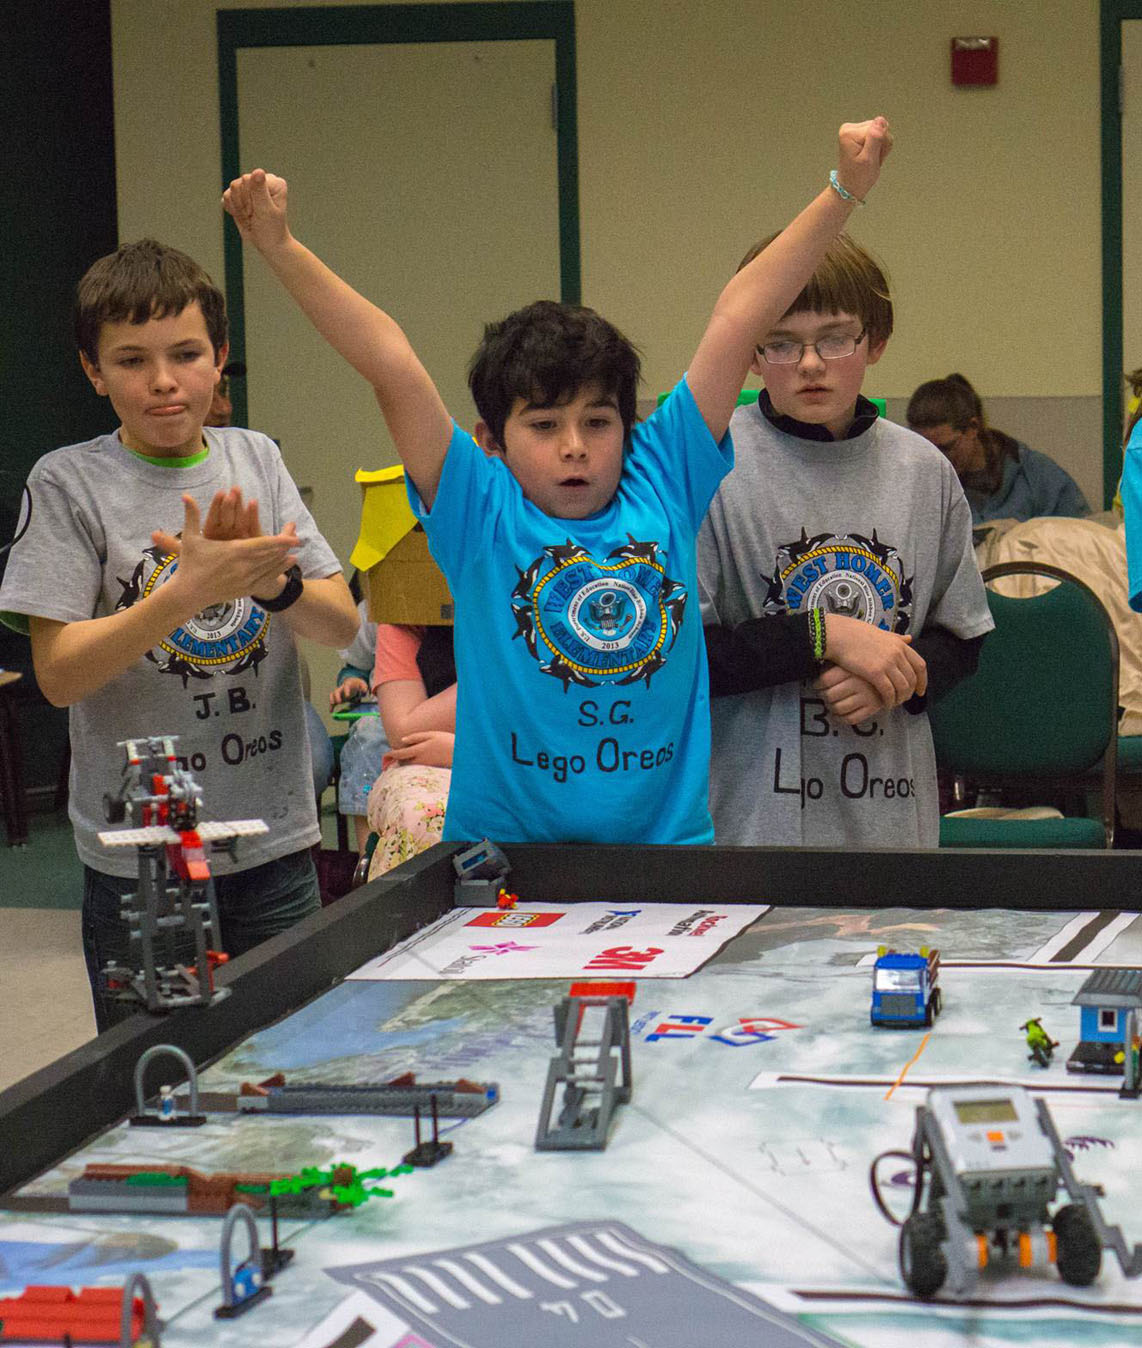 West Homer Elementary School “Lego Oreo” team members (from left) Josh Bradshaw, Sylvester Gaona and Ben Coble celebrate a successful move during Robotics competition on Saturday. Team members not pictured include Timberlee Davis, Katlin Cudaback and Aaron Toro. The team won the “Judges Choice” trophy.-Photo provided